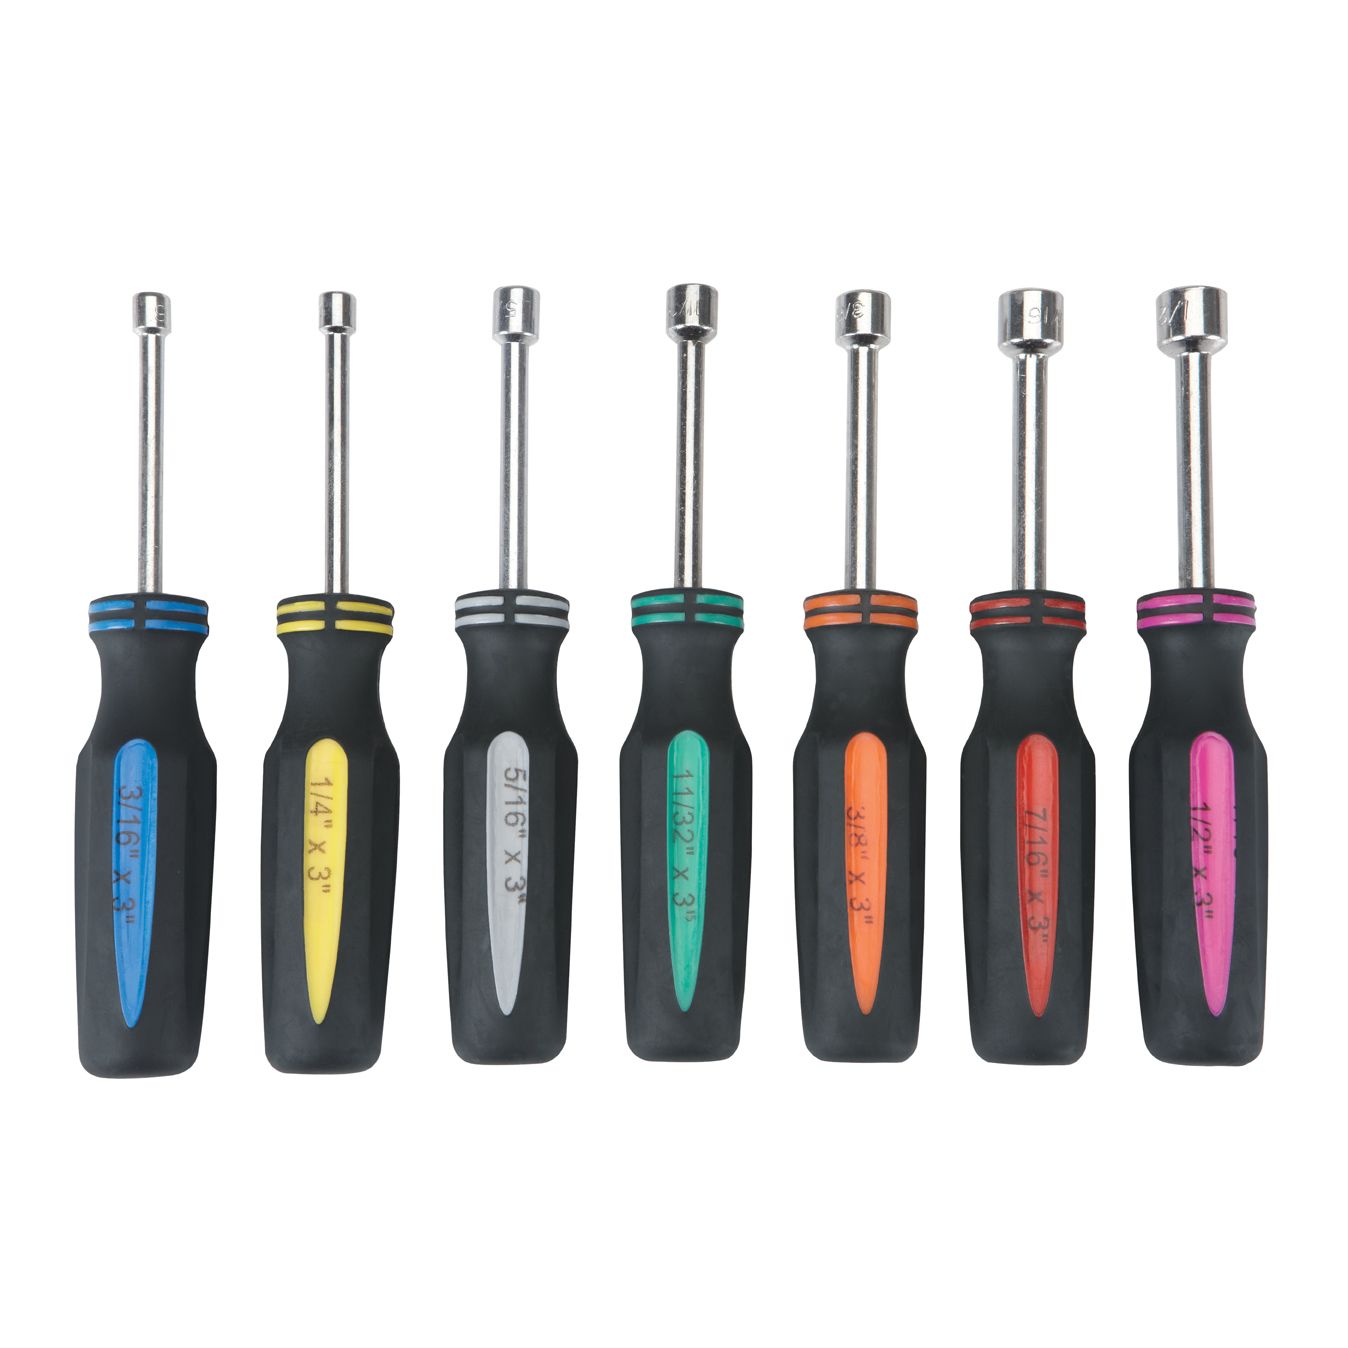 PITTSBURGH Hollow Shaft SAE Nut Driver Set, 7 Piece